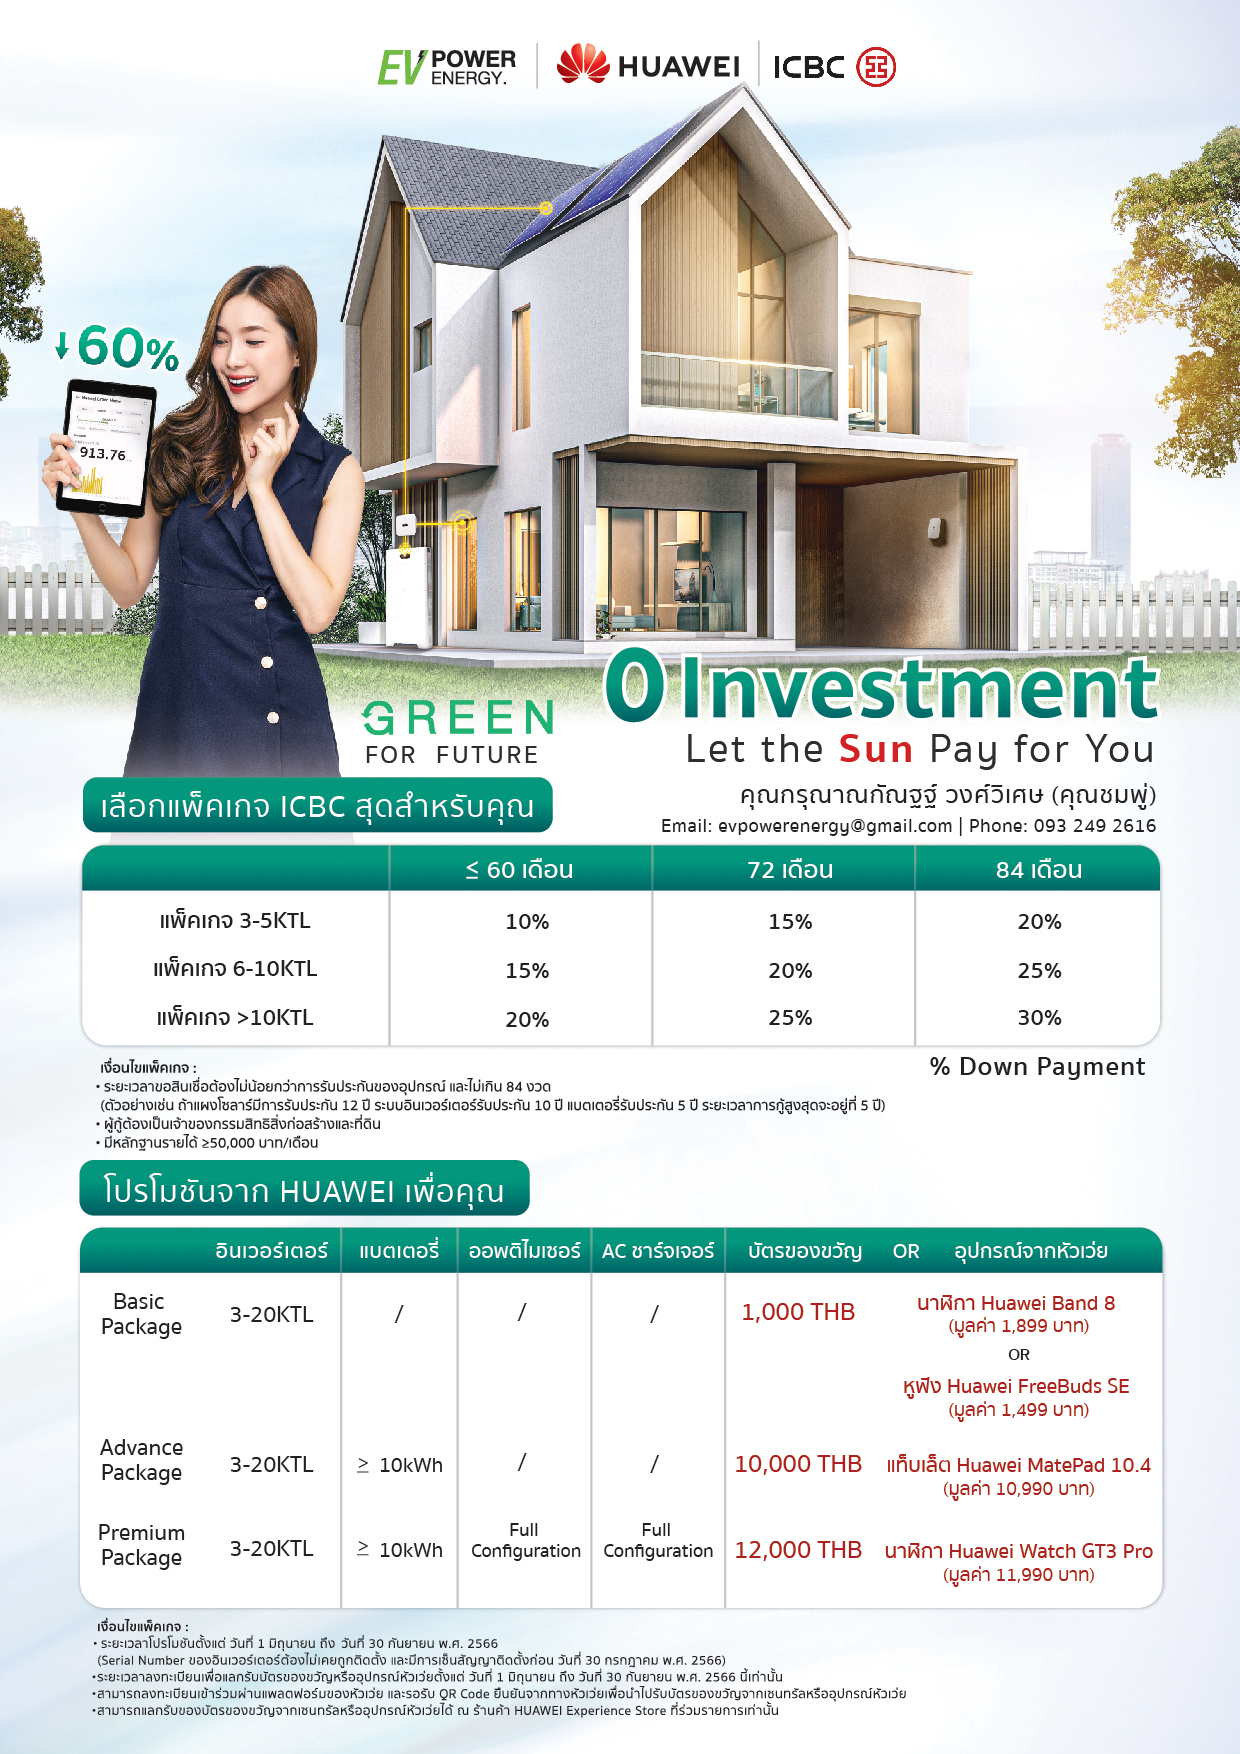 Huawei-ICBC Residential Promotion Brochure_edit